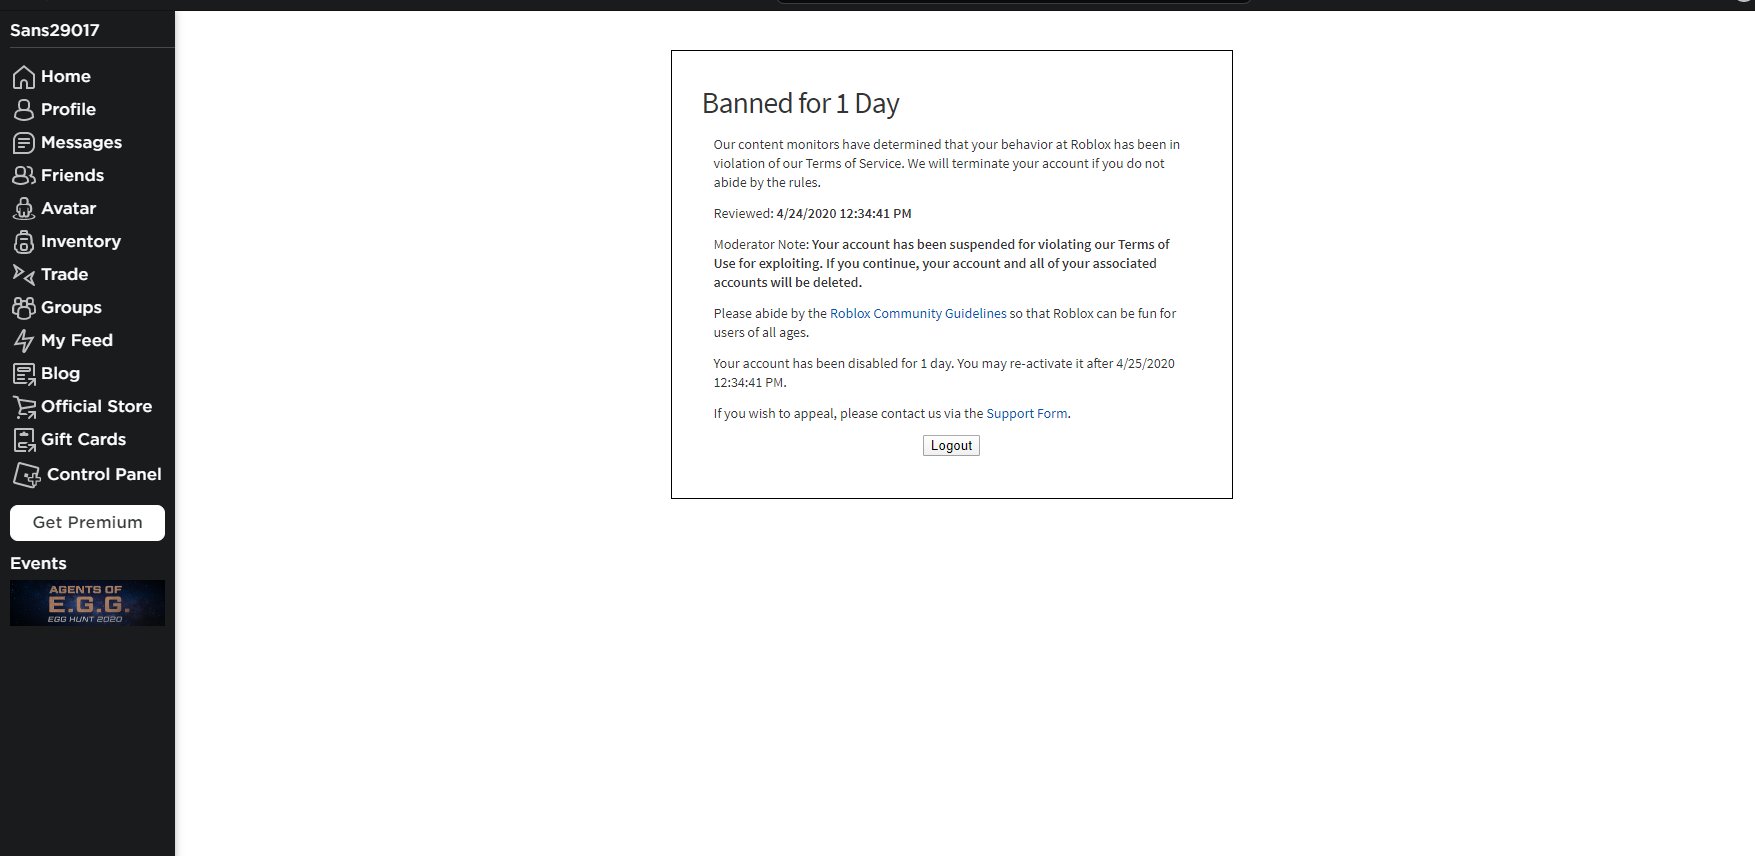 Timcup Meeturboipapyrus2904 On Twitter Thats What I Will Do If I Am Banned Look You Did You Banned Me Sans29017 Wendylittlebasket You Want Some Banned Notes Heres Some Banned Notes Unbannedmeandsans29017andwendylittlebasket Https T Co Niizami7vd - roblox ban note